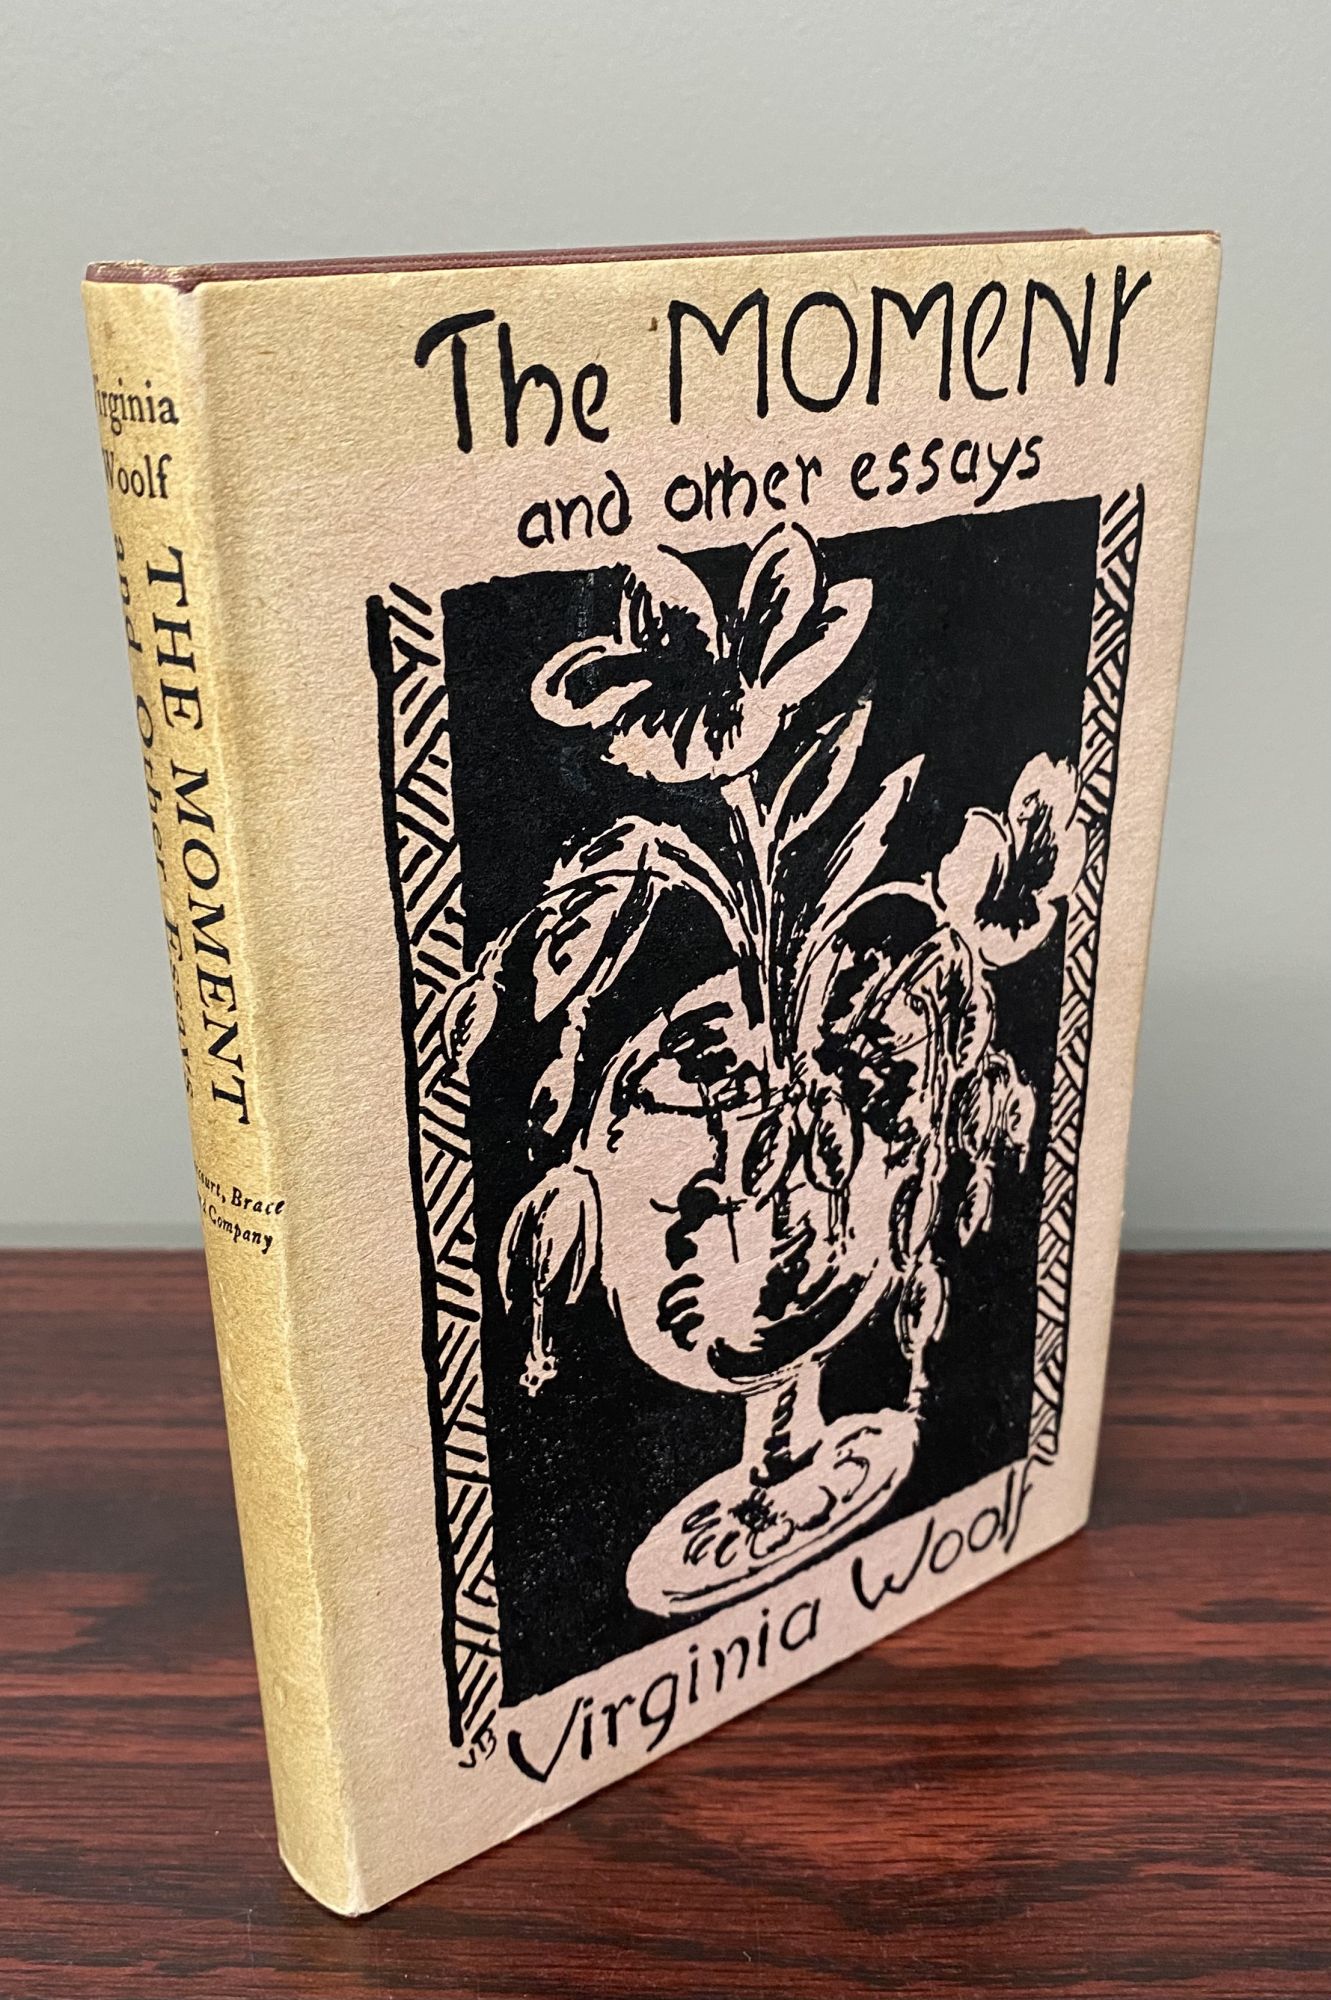 Woolf, Virginia - The Moment and Other Essays